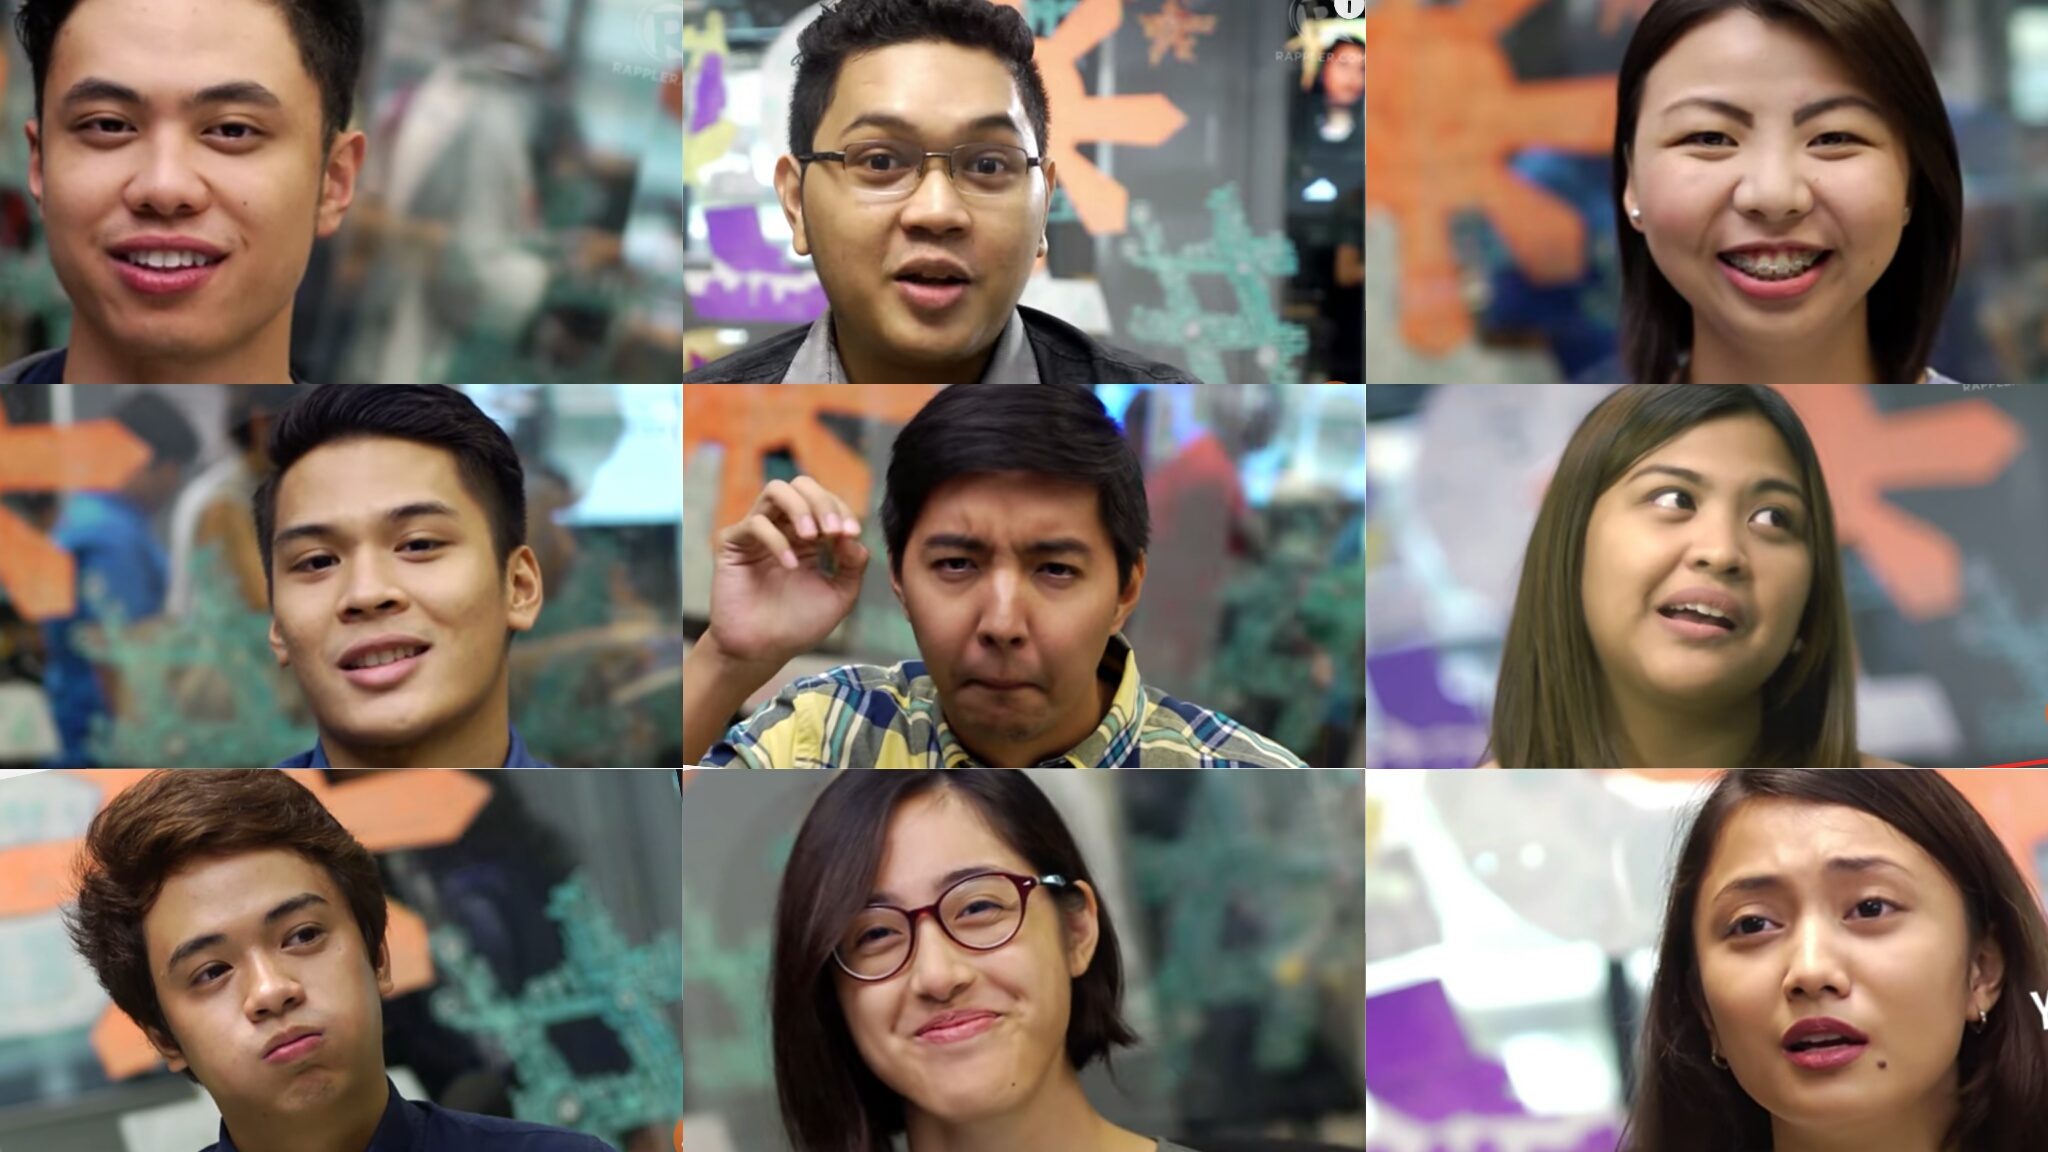 15 hard lessons fresh grads learn from first jobs out of college